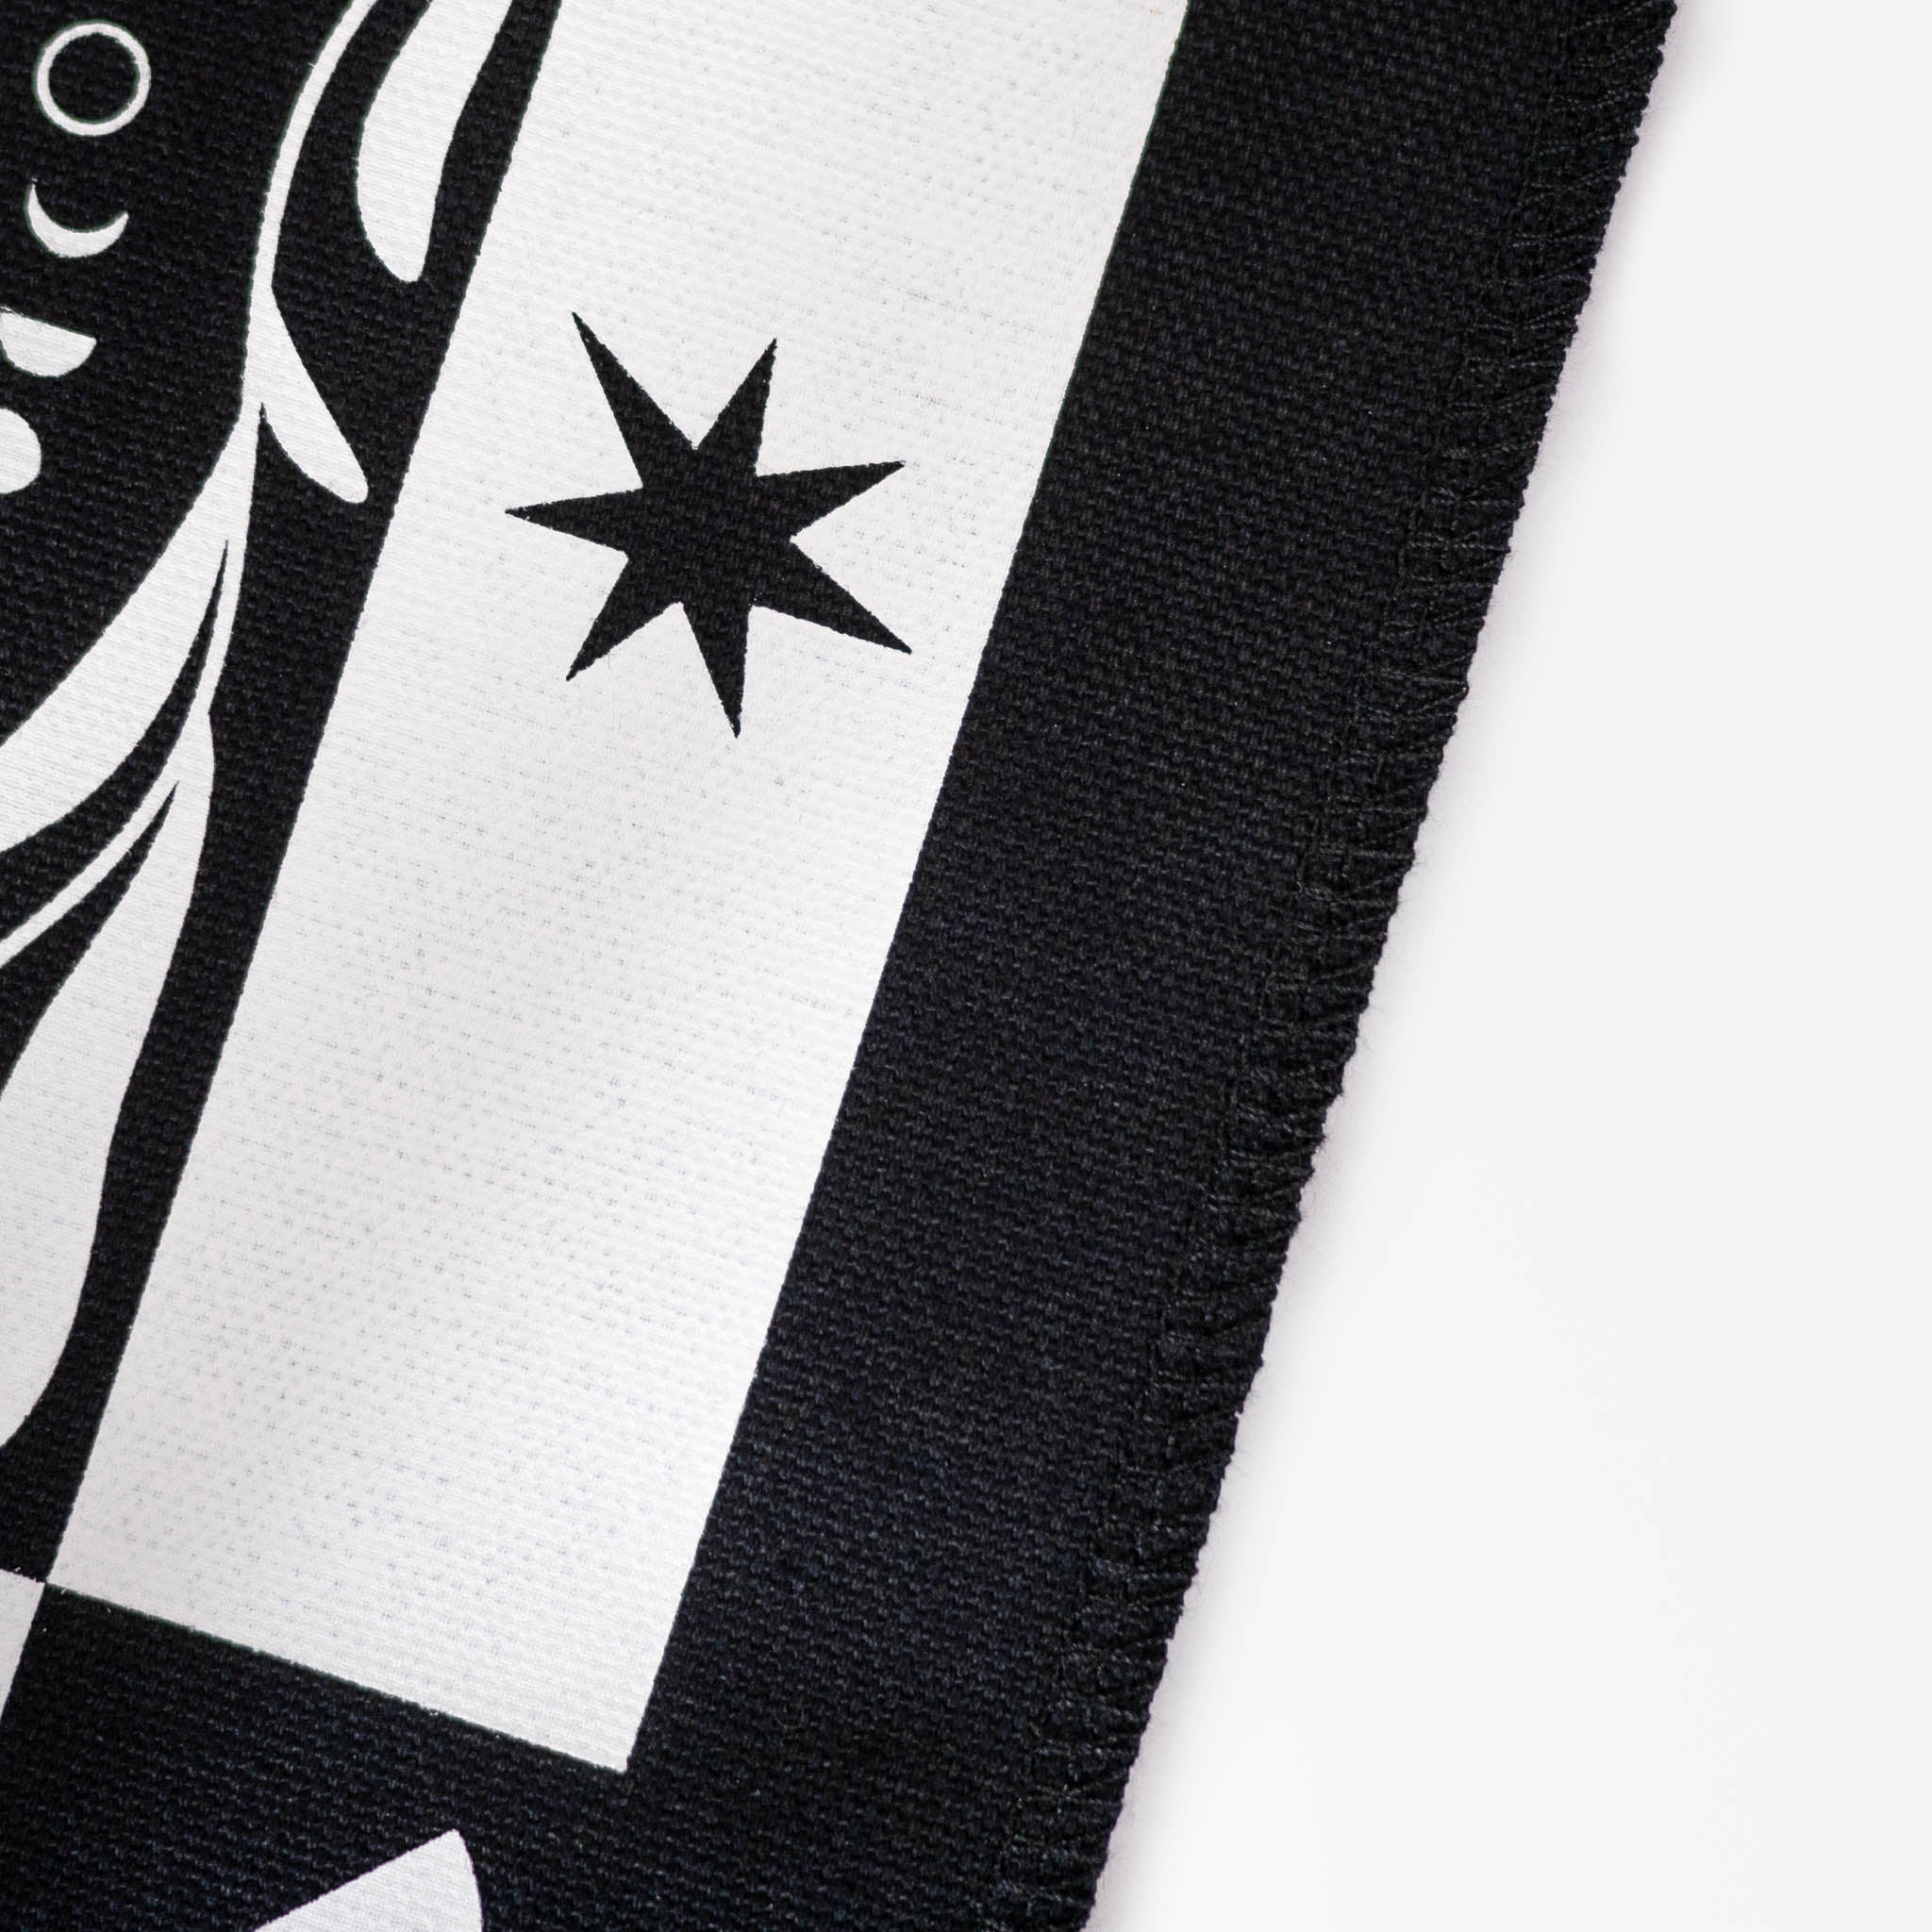 Close up of the neat, overlocked edge of the black moon patch with white printed star design